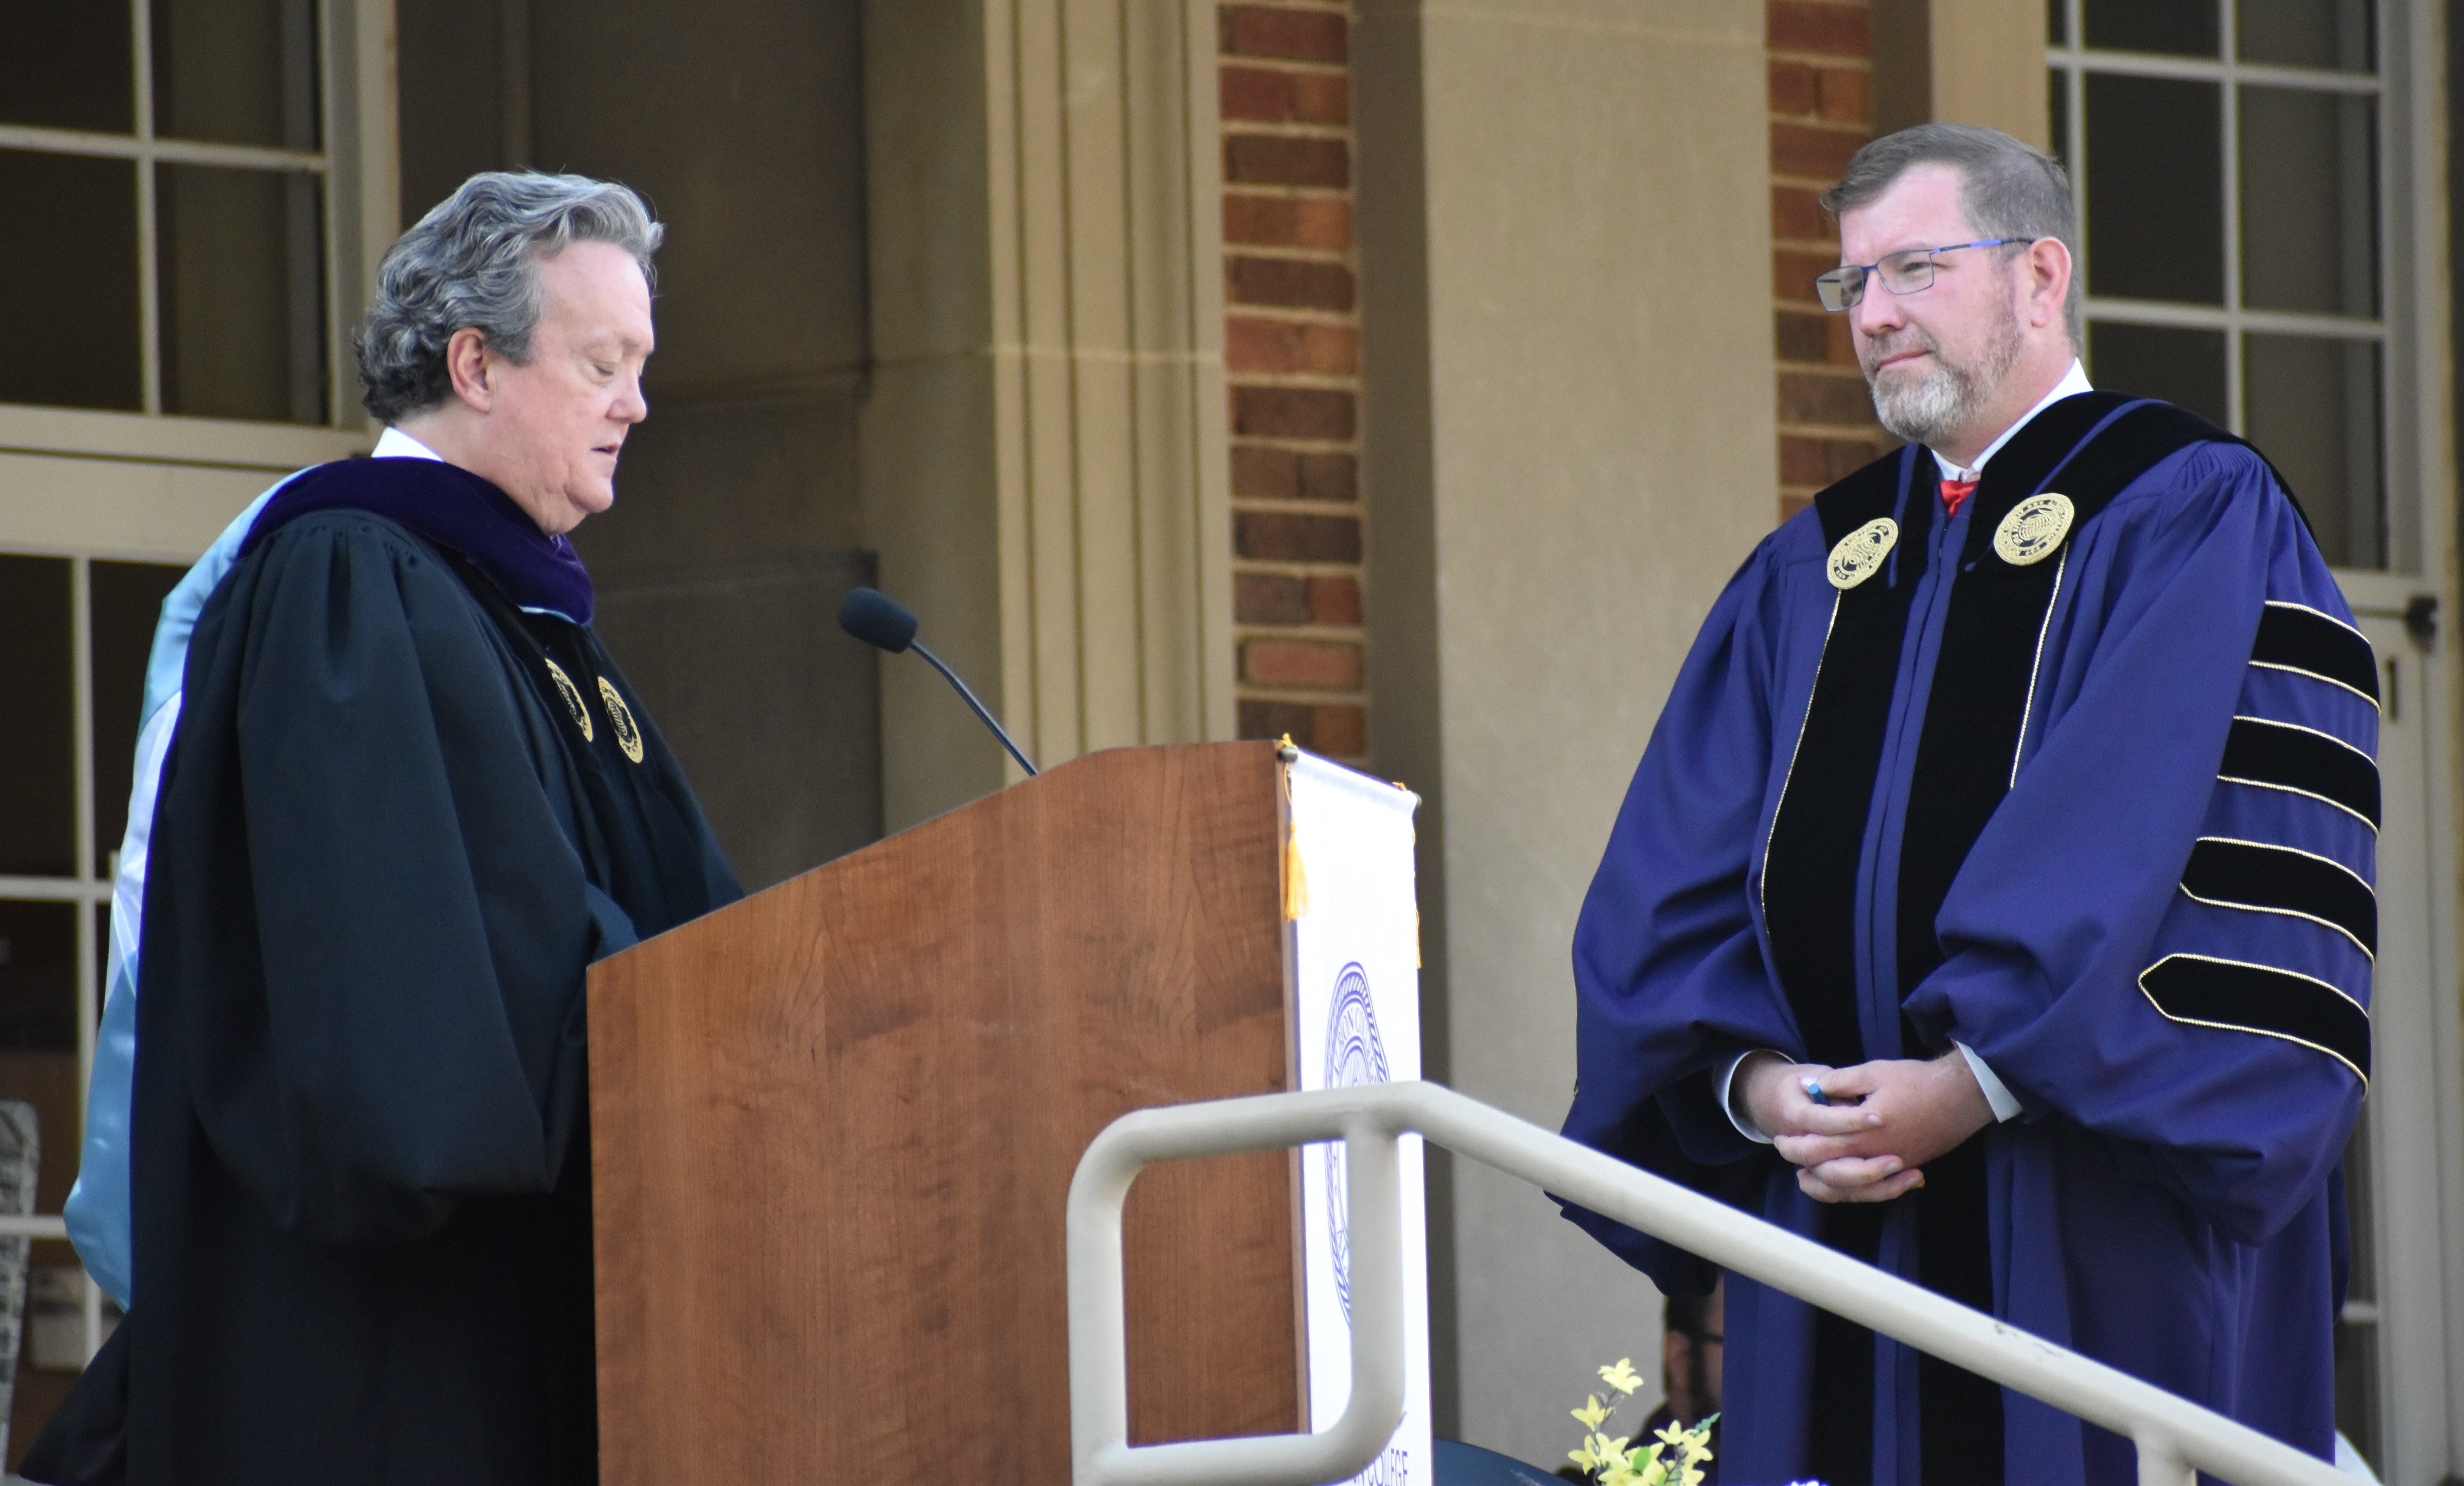 Mathew Johnson, then the president of Albion College, listens to Michael Harrington, then the chairman of Albion College's Board of Trustees, during an inauguration ceremony in September 2021. A few months later, both men had resigned their position.